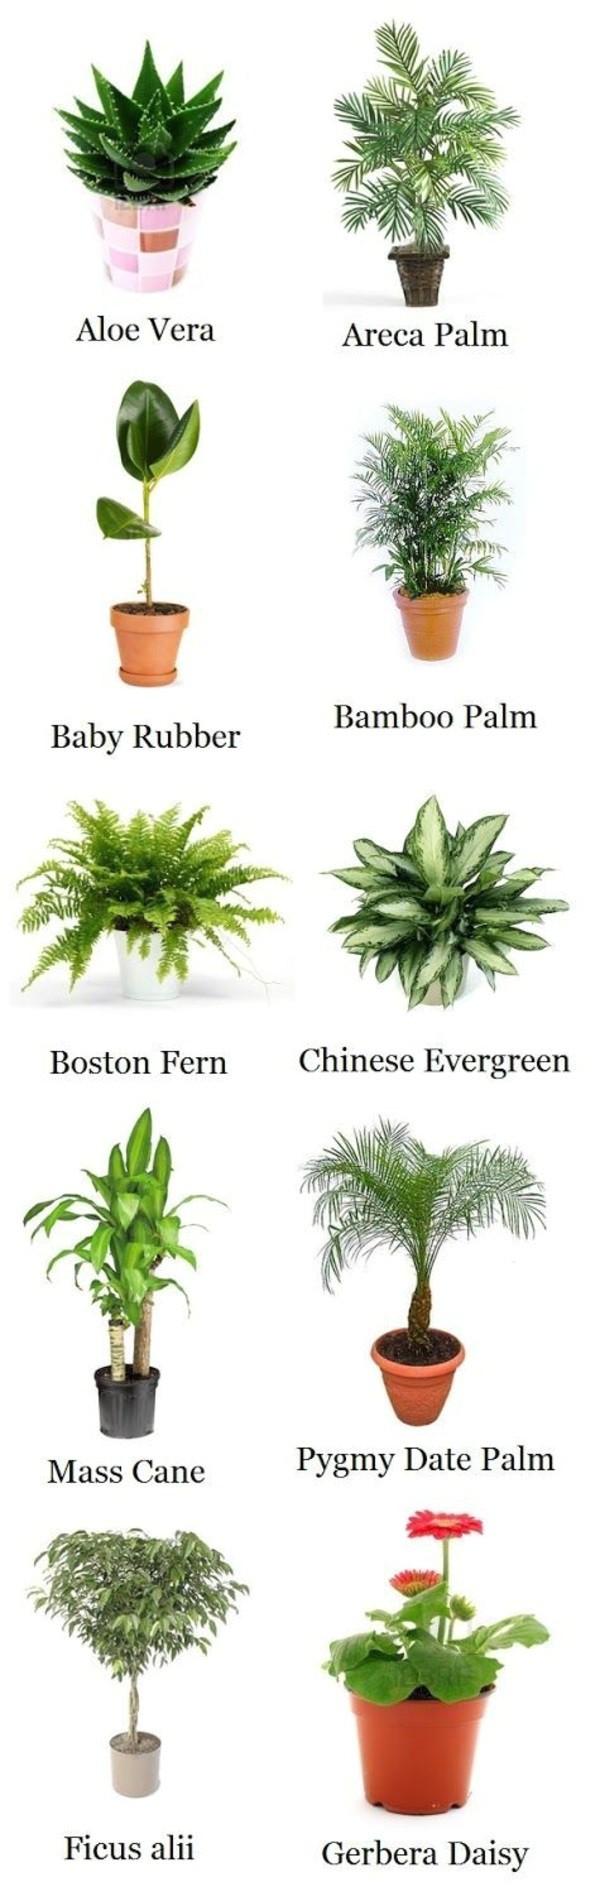 Types Of House Plant Palm Trees Palm Species Houseplants Rhapis Excelsa is One Of the